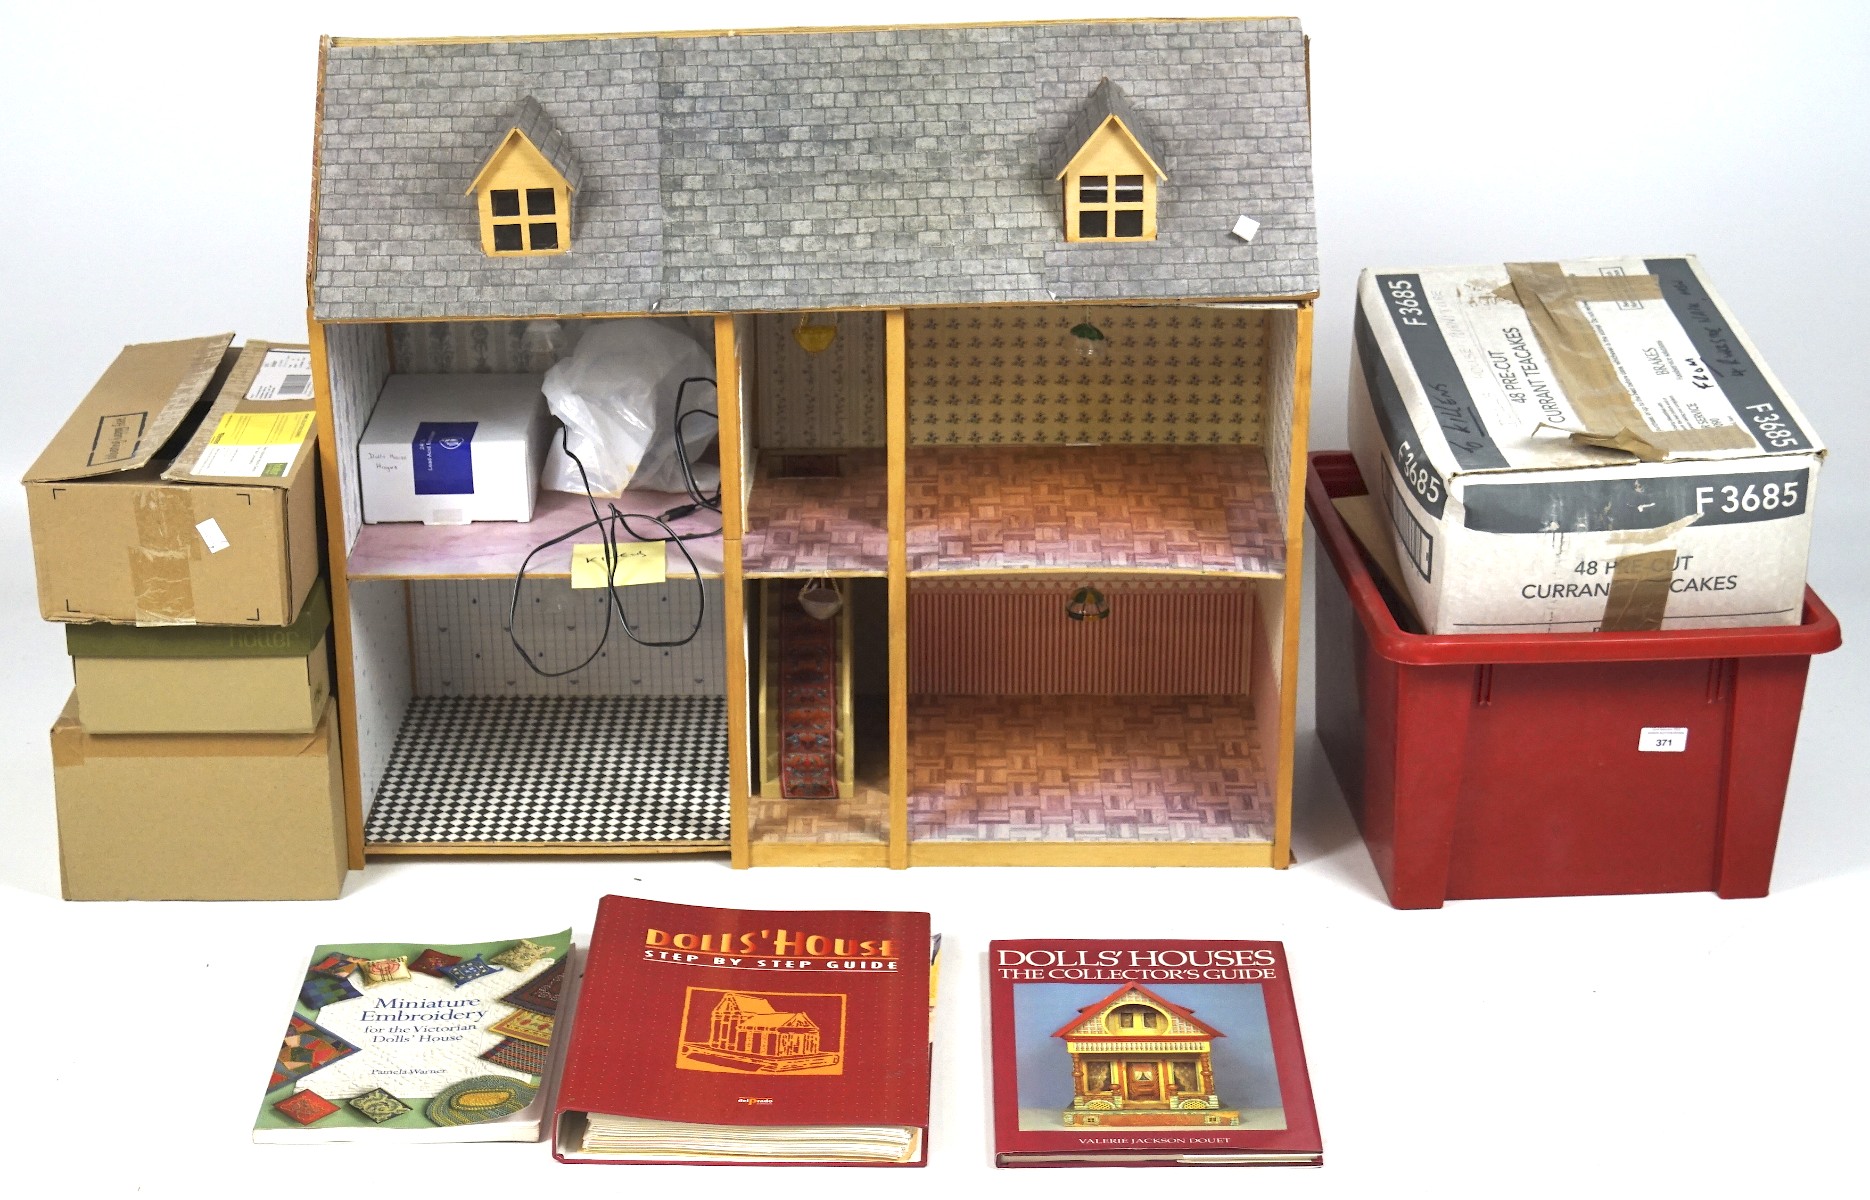 A vintage dolls house with a selection of dolls house furniture and books,